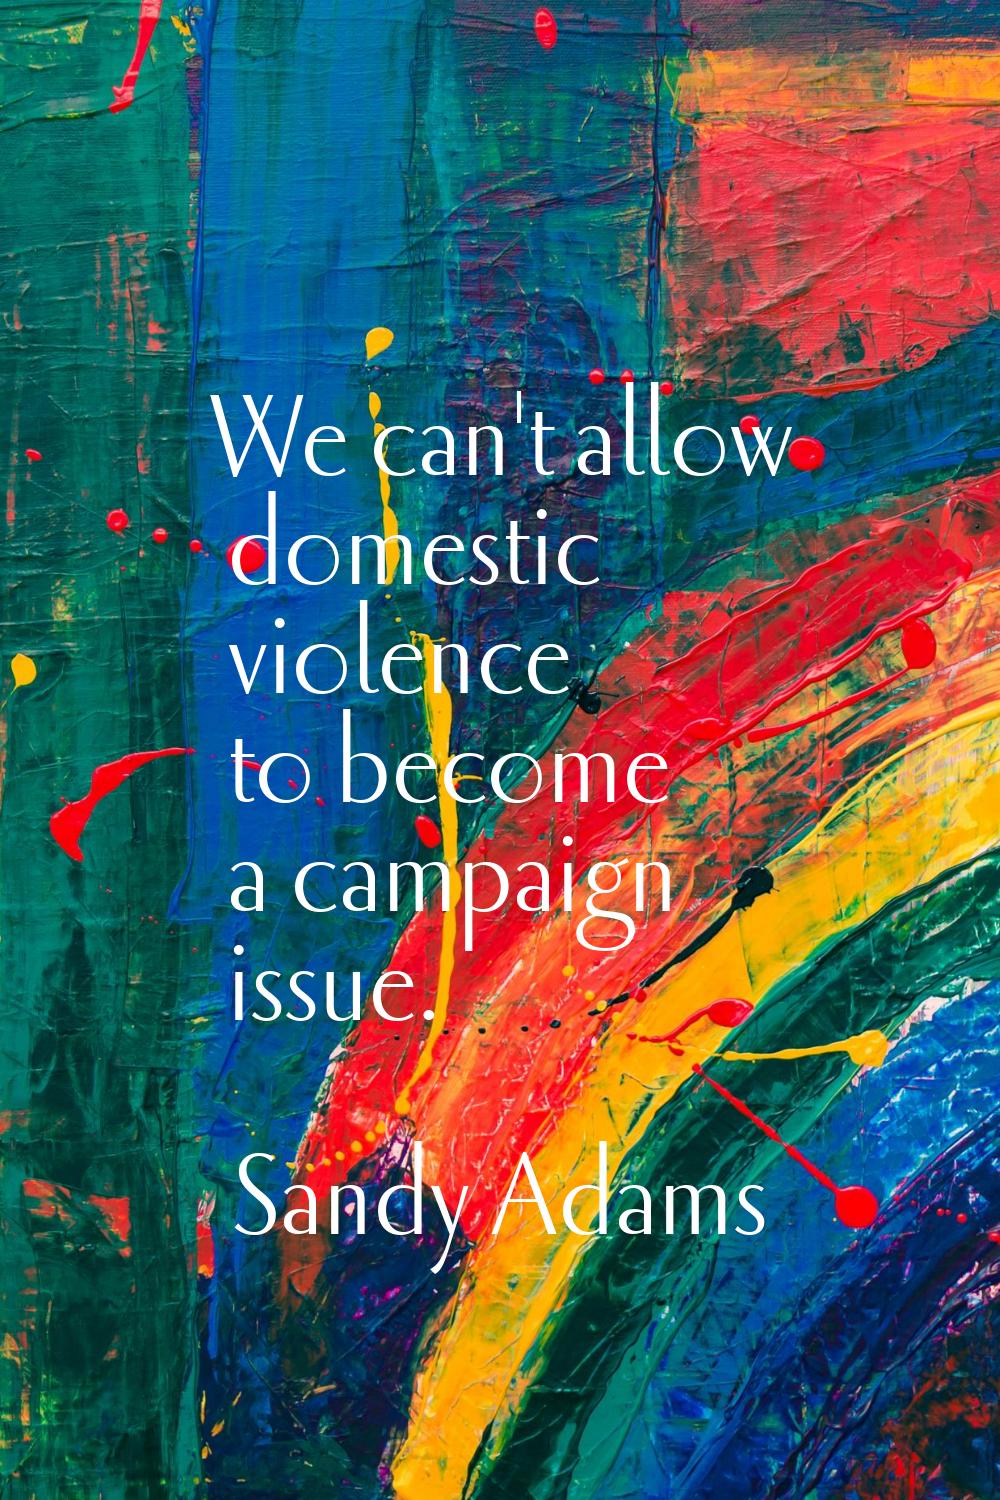 We can't allow domestic violence to become a campaign issue.